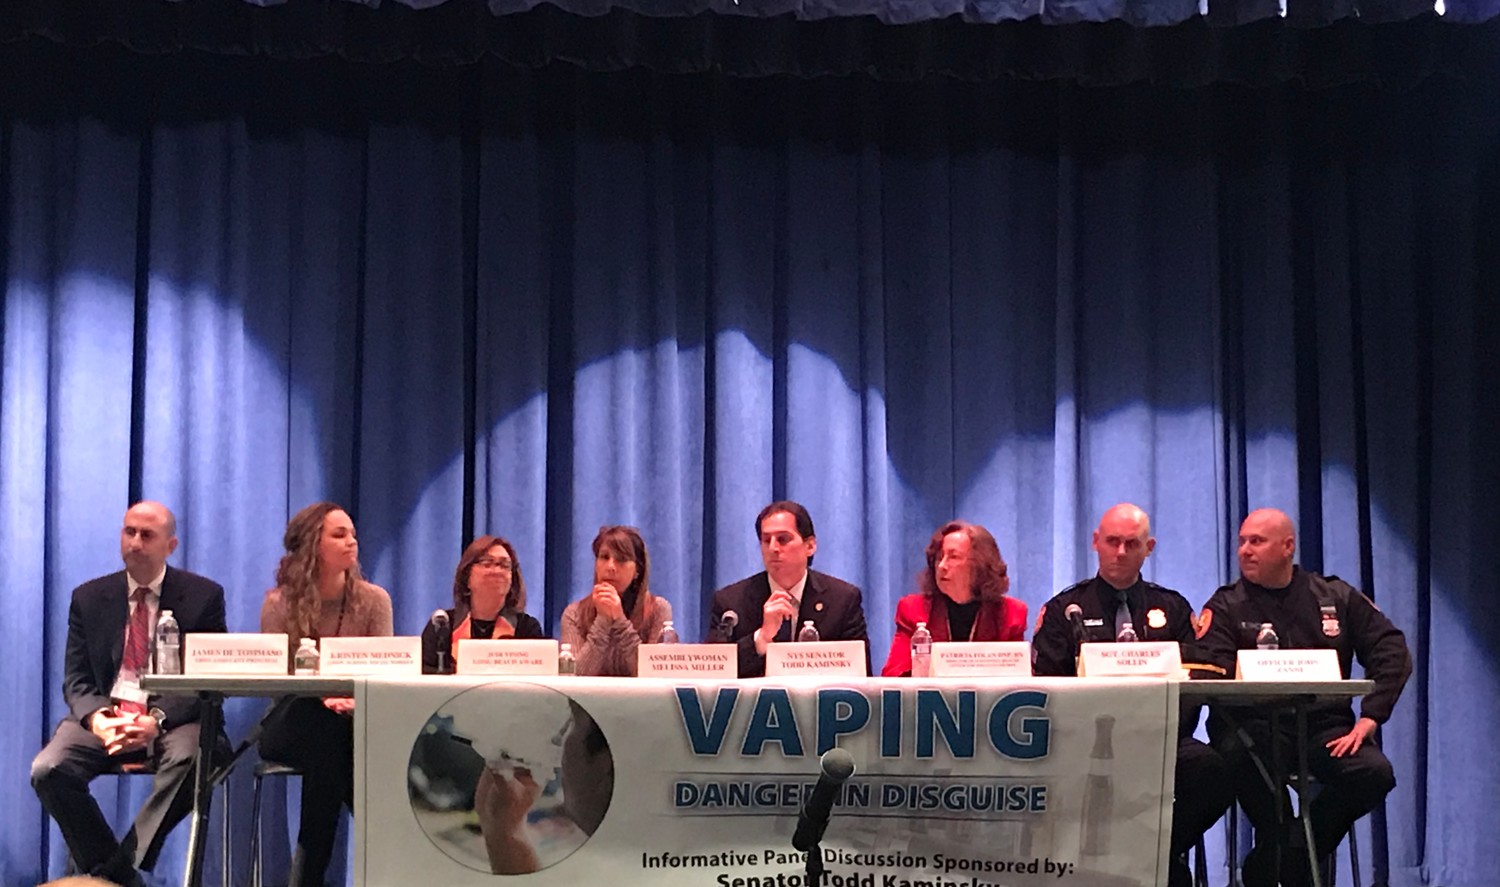 Vaping was the subject of a forum at East Rockaway Junior-Senior High School last week. Among the speakers were, from left, James DeTommaso, the high school’s assistant principal; Kristen Mednick, a school social worker; Judi Vining, executive director of Long Beach Aware; State Assemblywoman Melissa Miller; State Sen. Todd Kaminsky; Patricia Folan, director of the Northwell Health Center for Tobacco Control; Nassau County Police Sgt. Charles Solan; and NCPD Officer John Zanni.